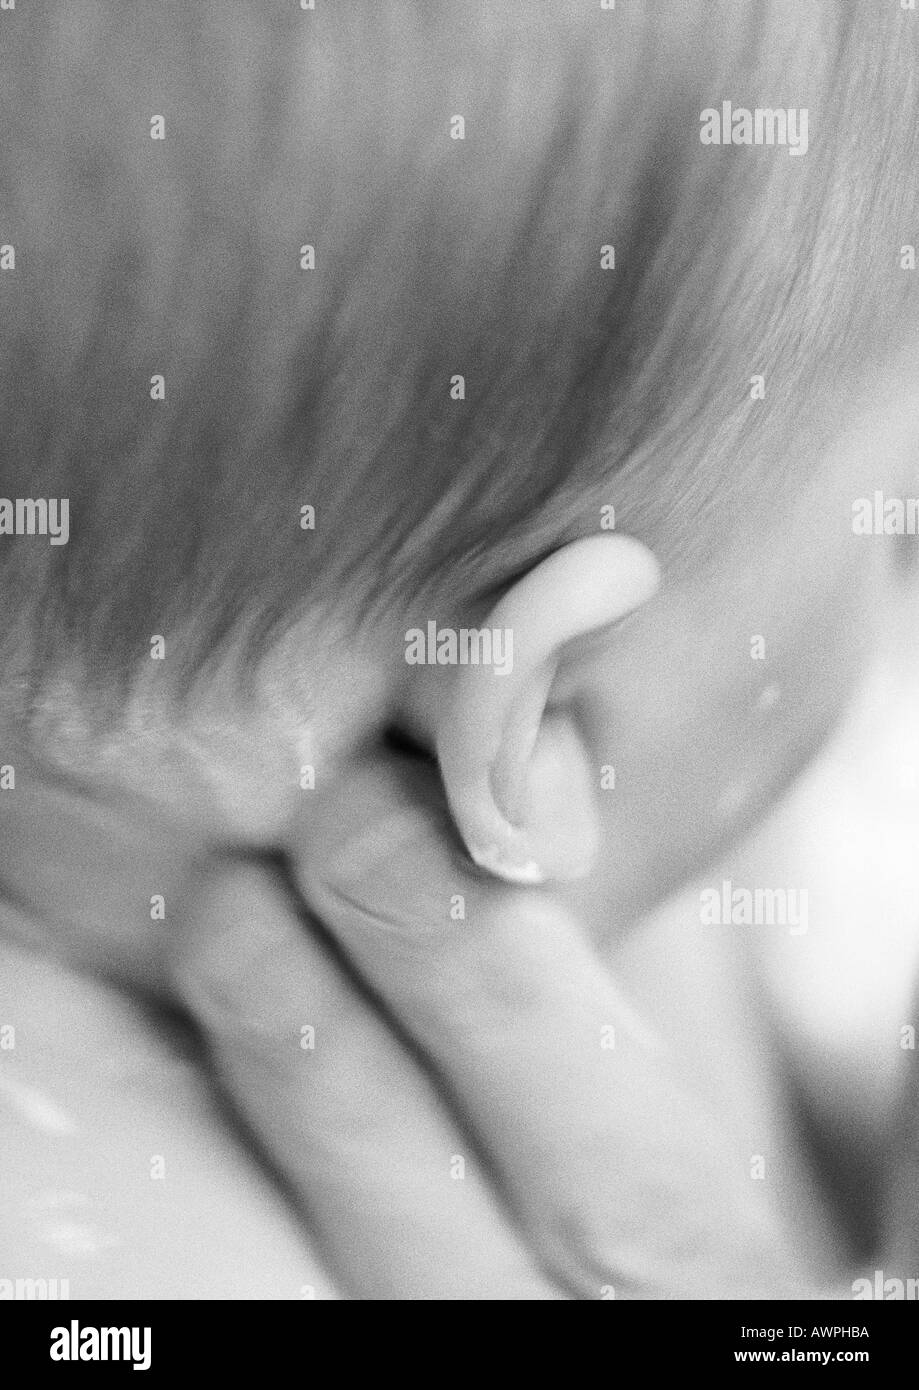 Adult fingers applying lotion behind baby's ear, close-up, b&w Stock Photo